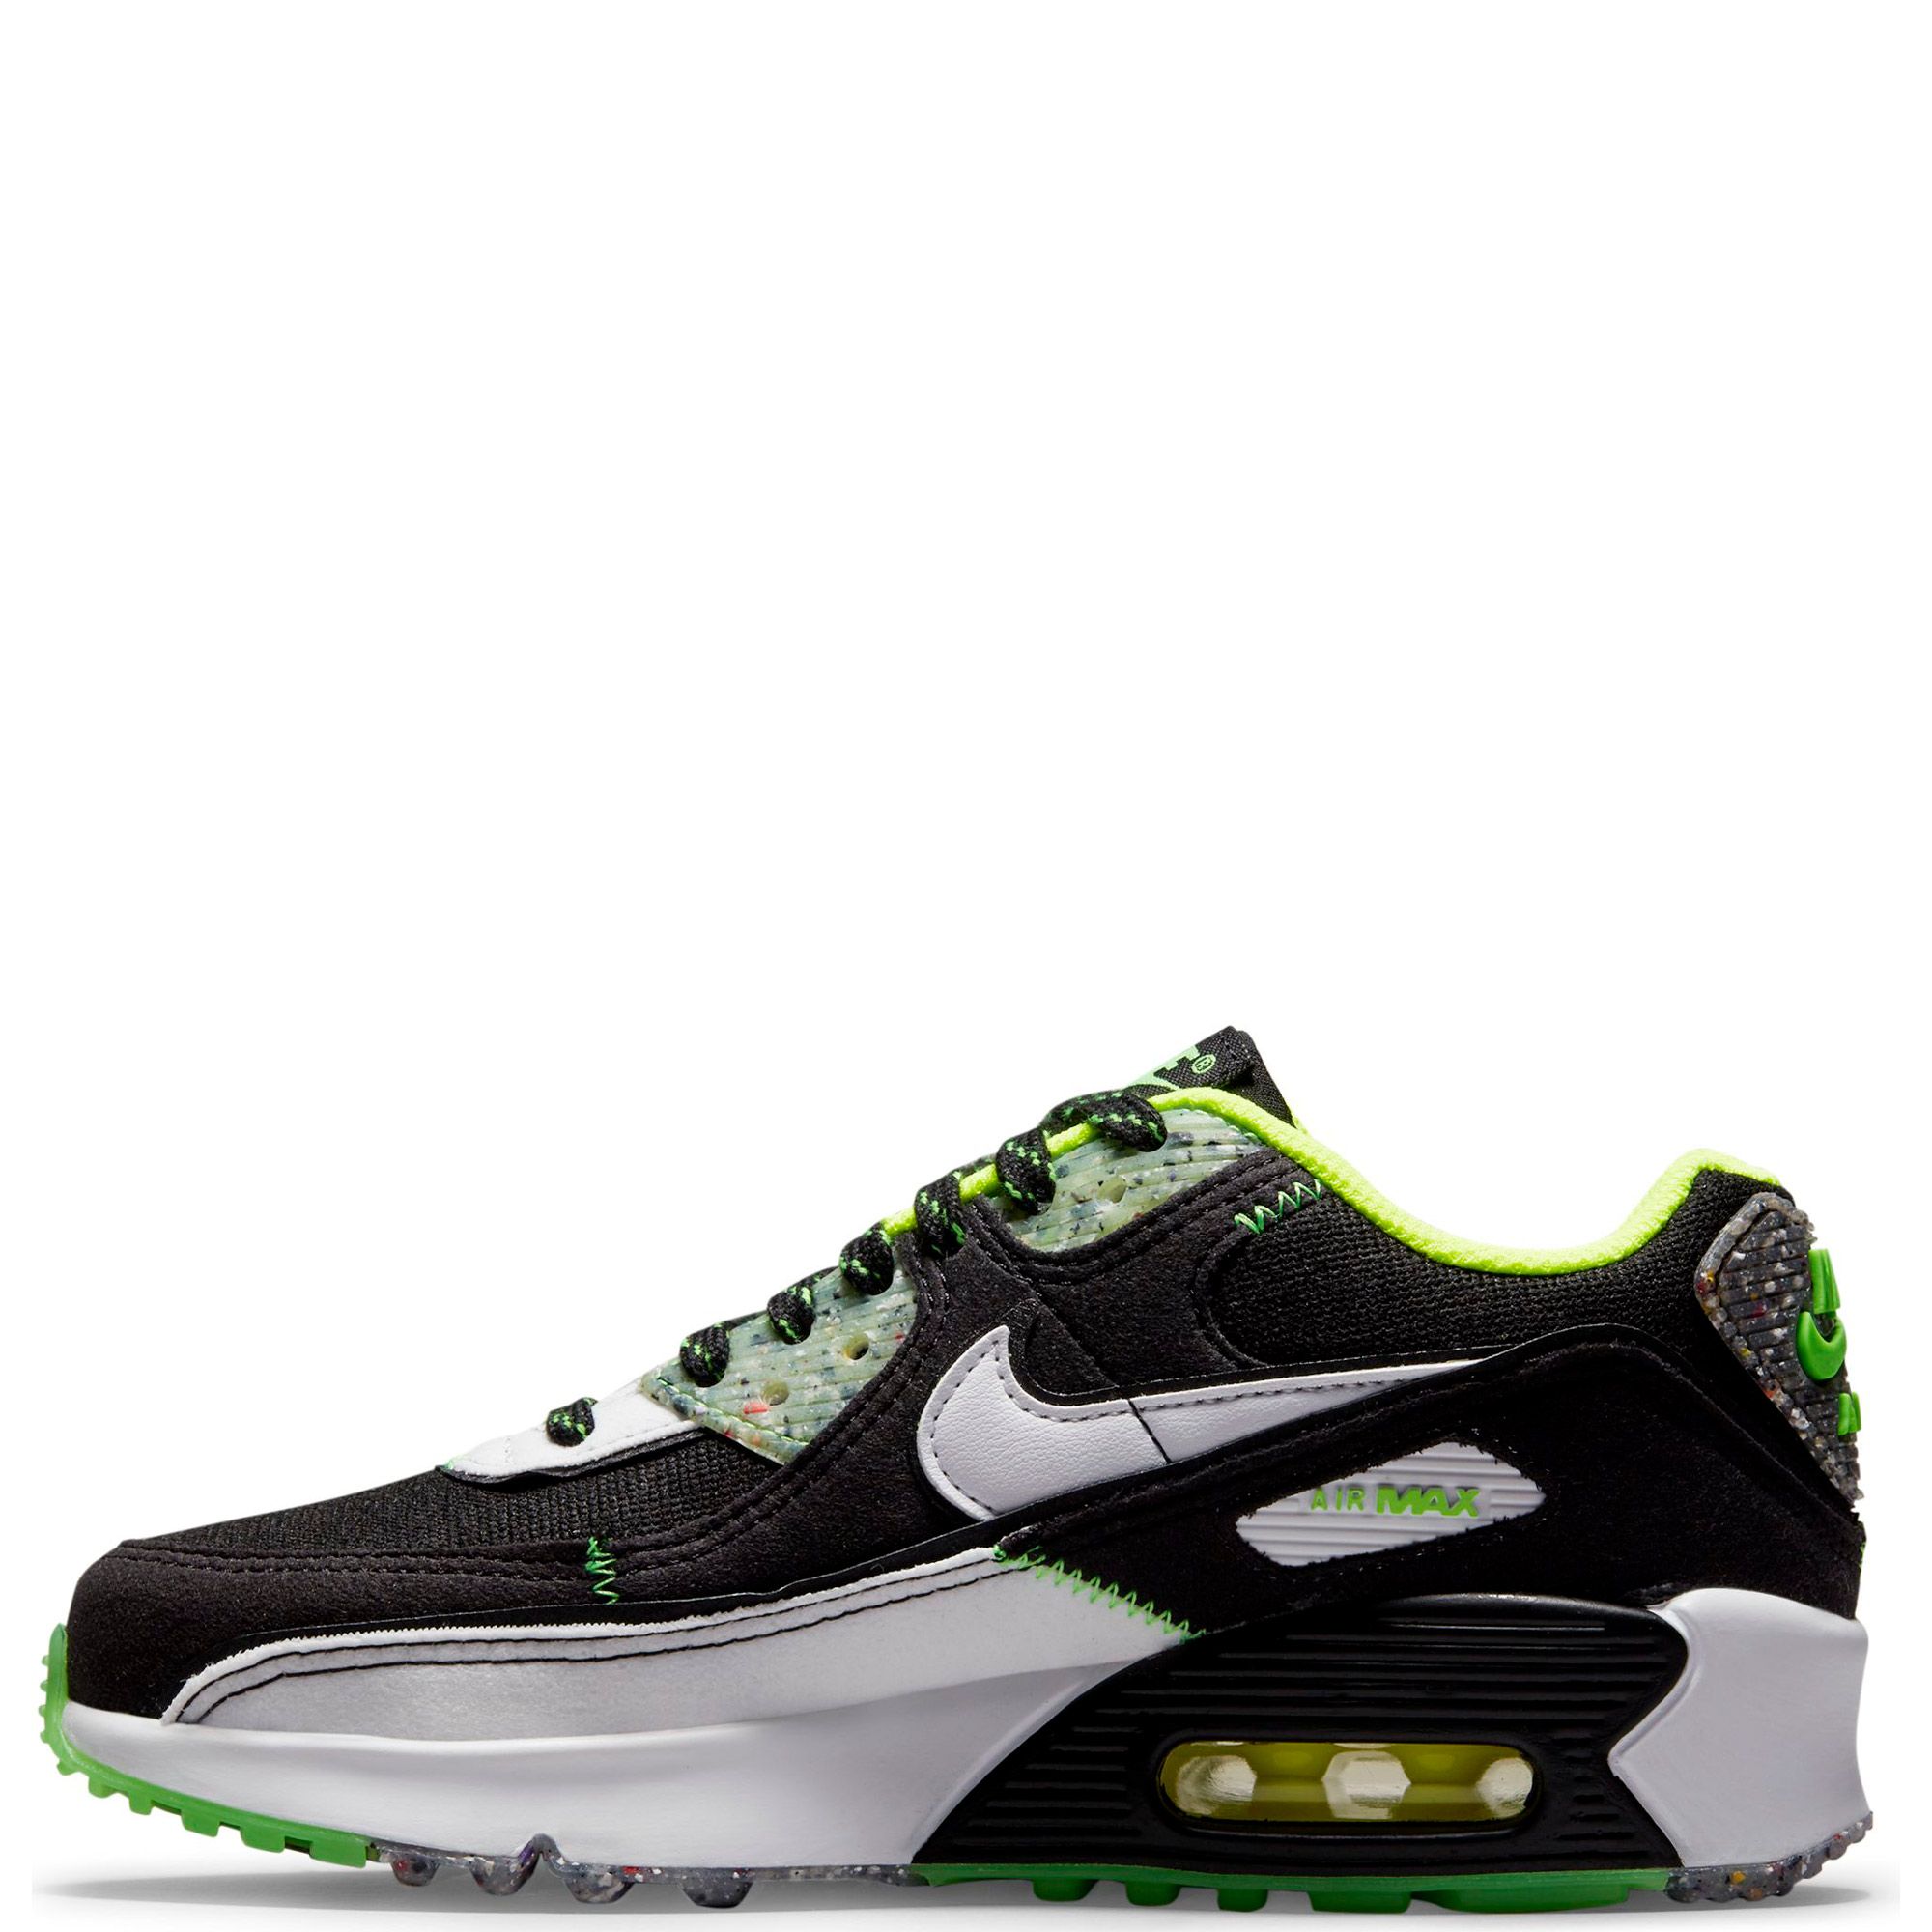 nike air max 90 exeter edition dj5922 001 preview Low x LOUIS VUITTON LV  'Black' - nike air max 90 exeter edition dj5922 001 preview